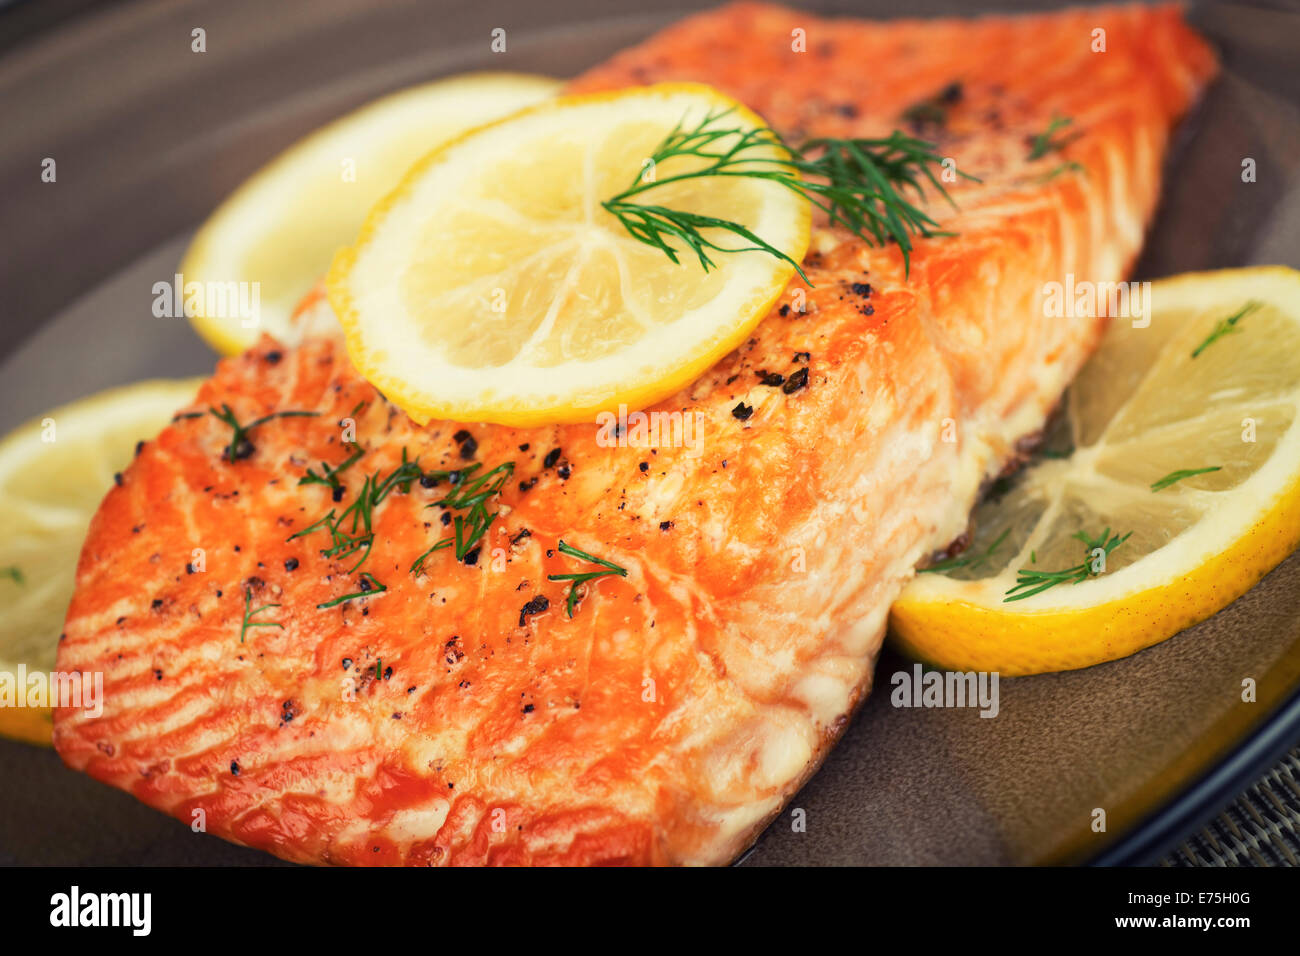 Salmon Fillet, Grilled Stock Photo